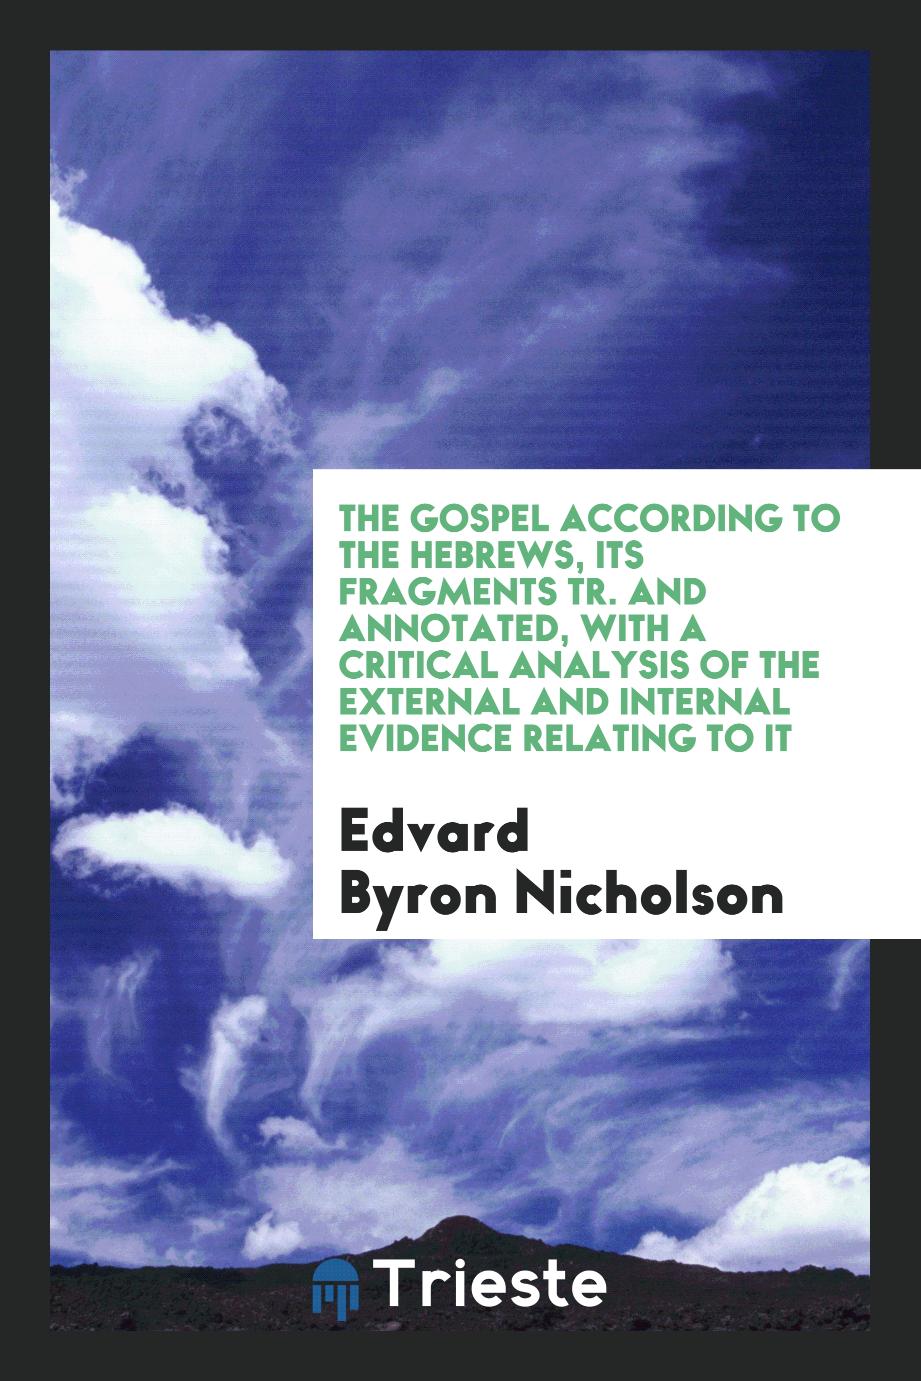 The Gospel According to the Hebrews, Its Fragments Tr. And Annotated, with a Critical Analysis of the External and Internal Evidence Relating to It